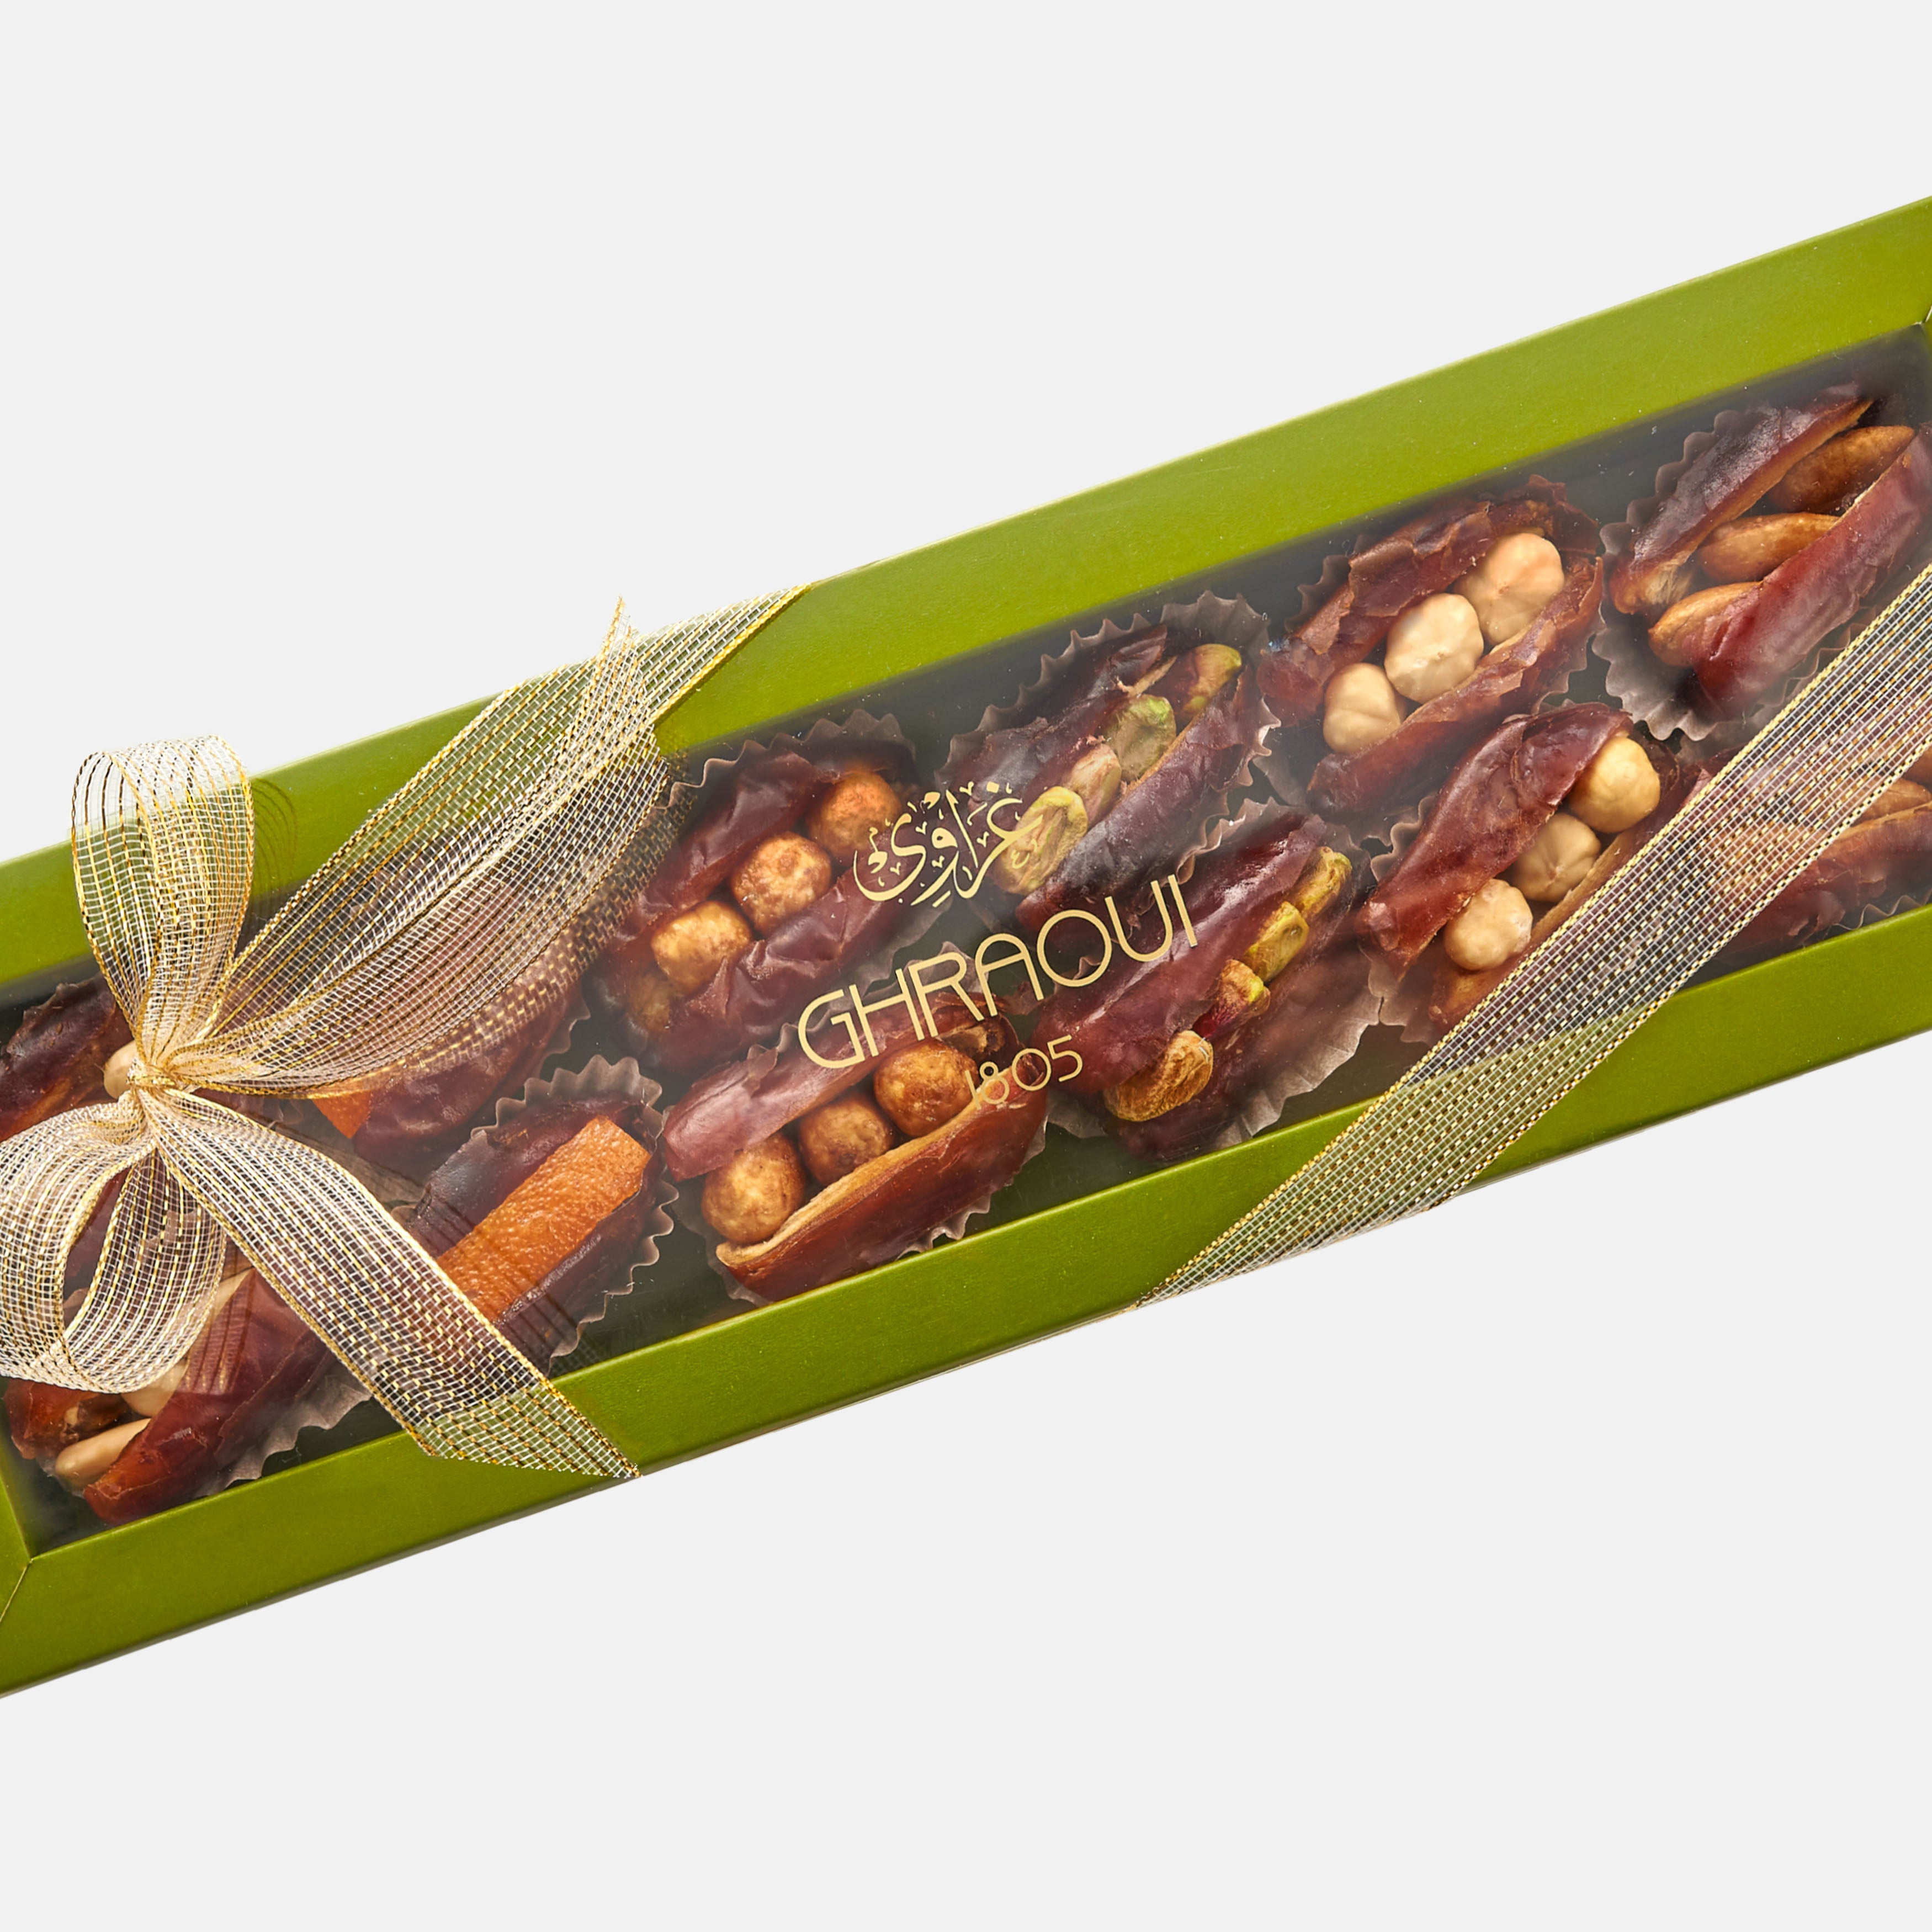 A giftbox of assorted dates